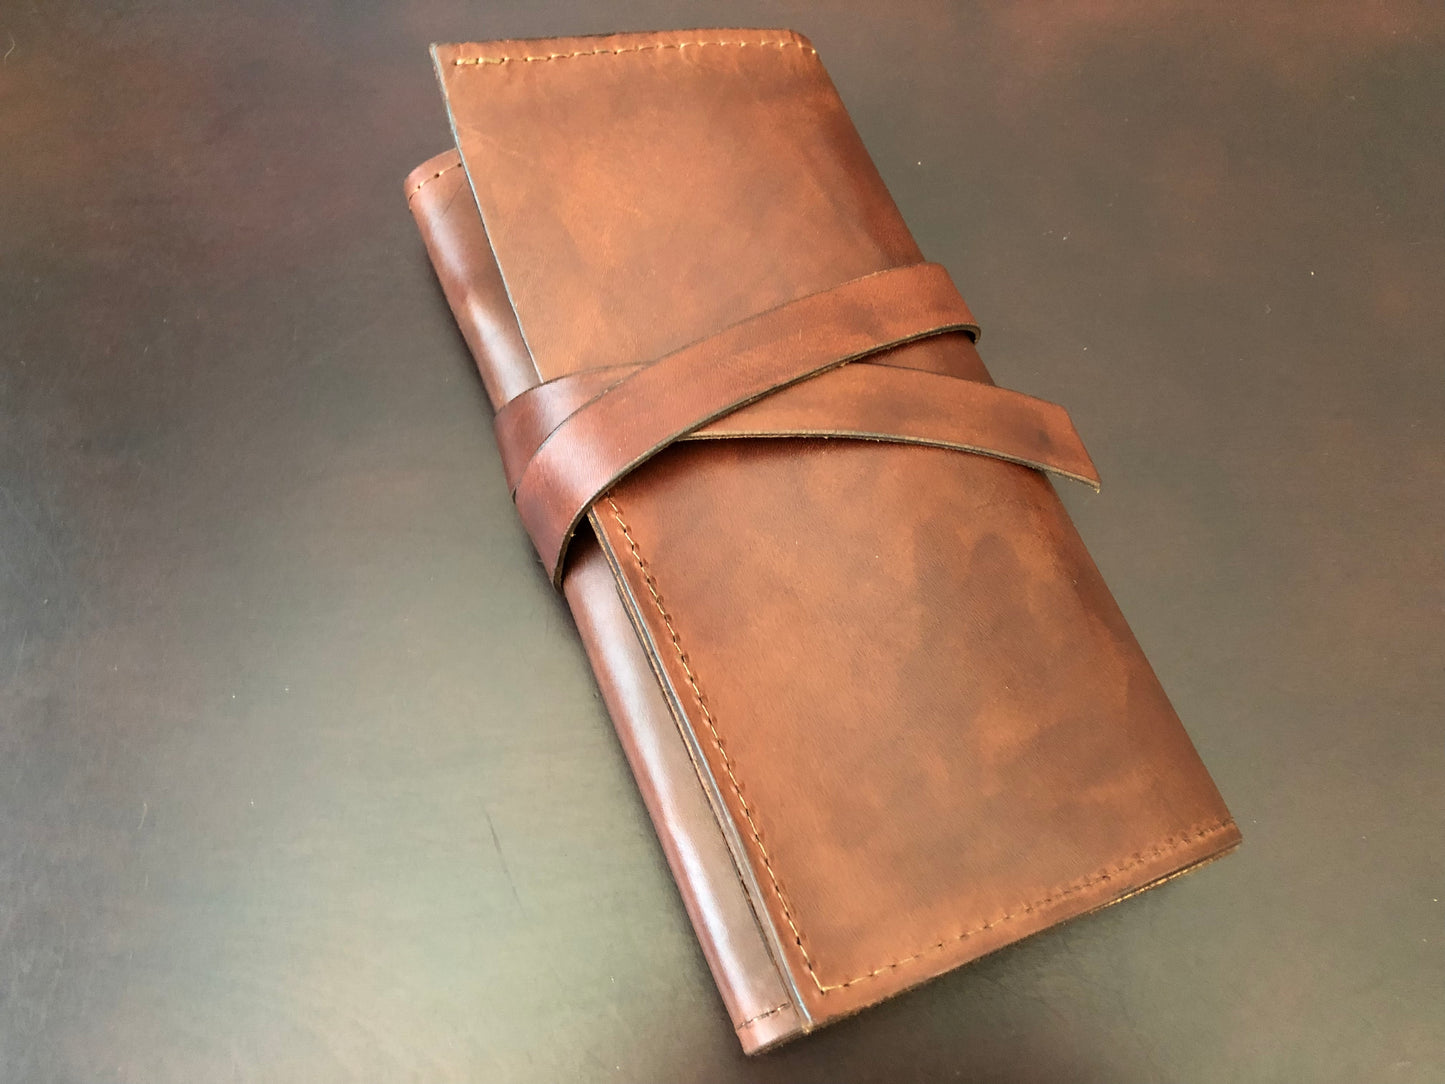 Handcrafted brown leather tool roll lies on table.